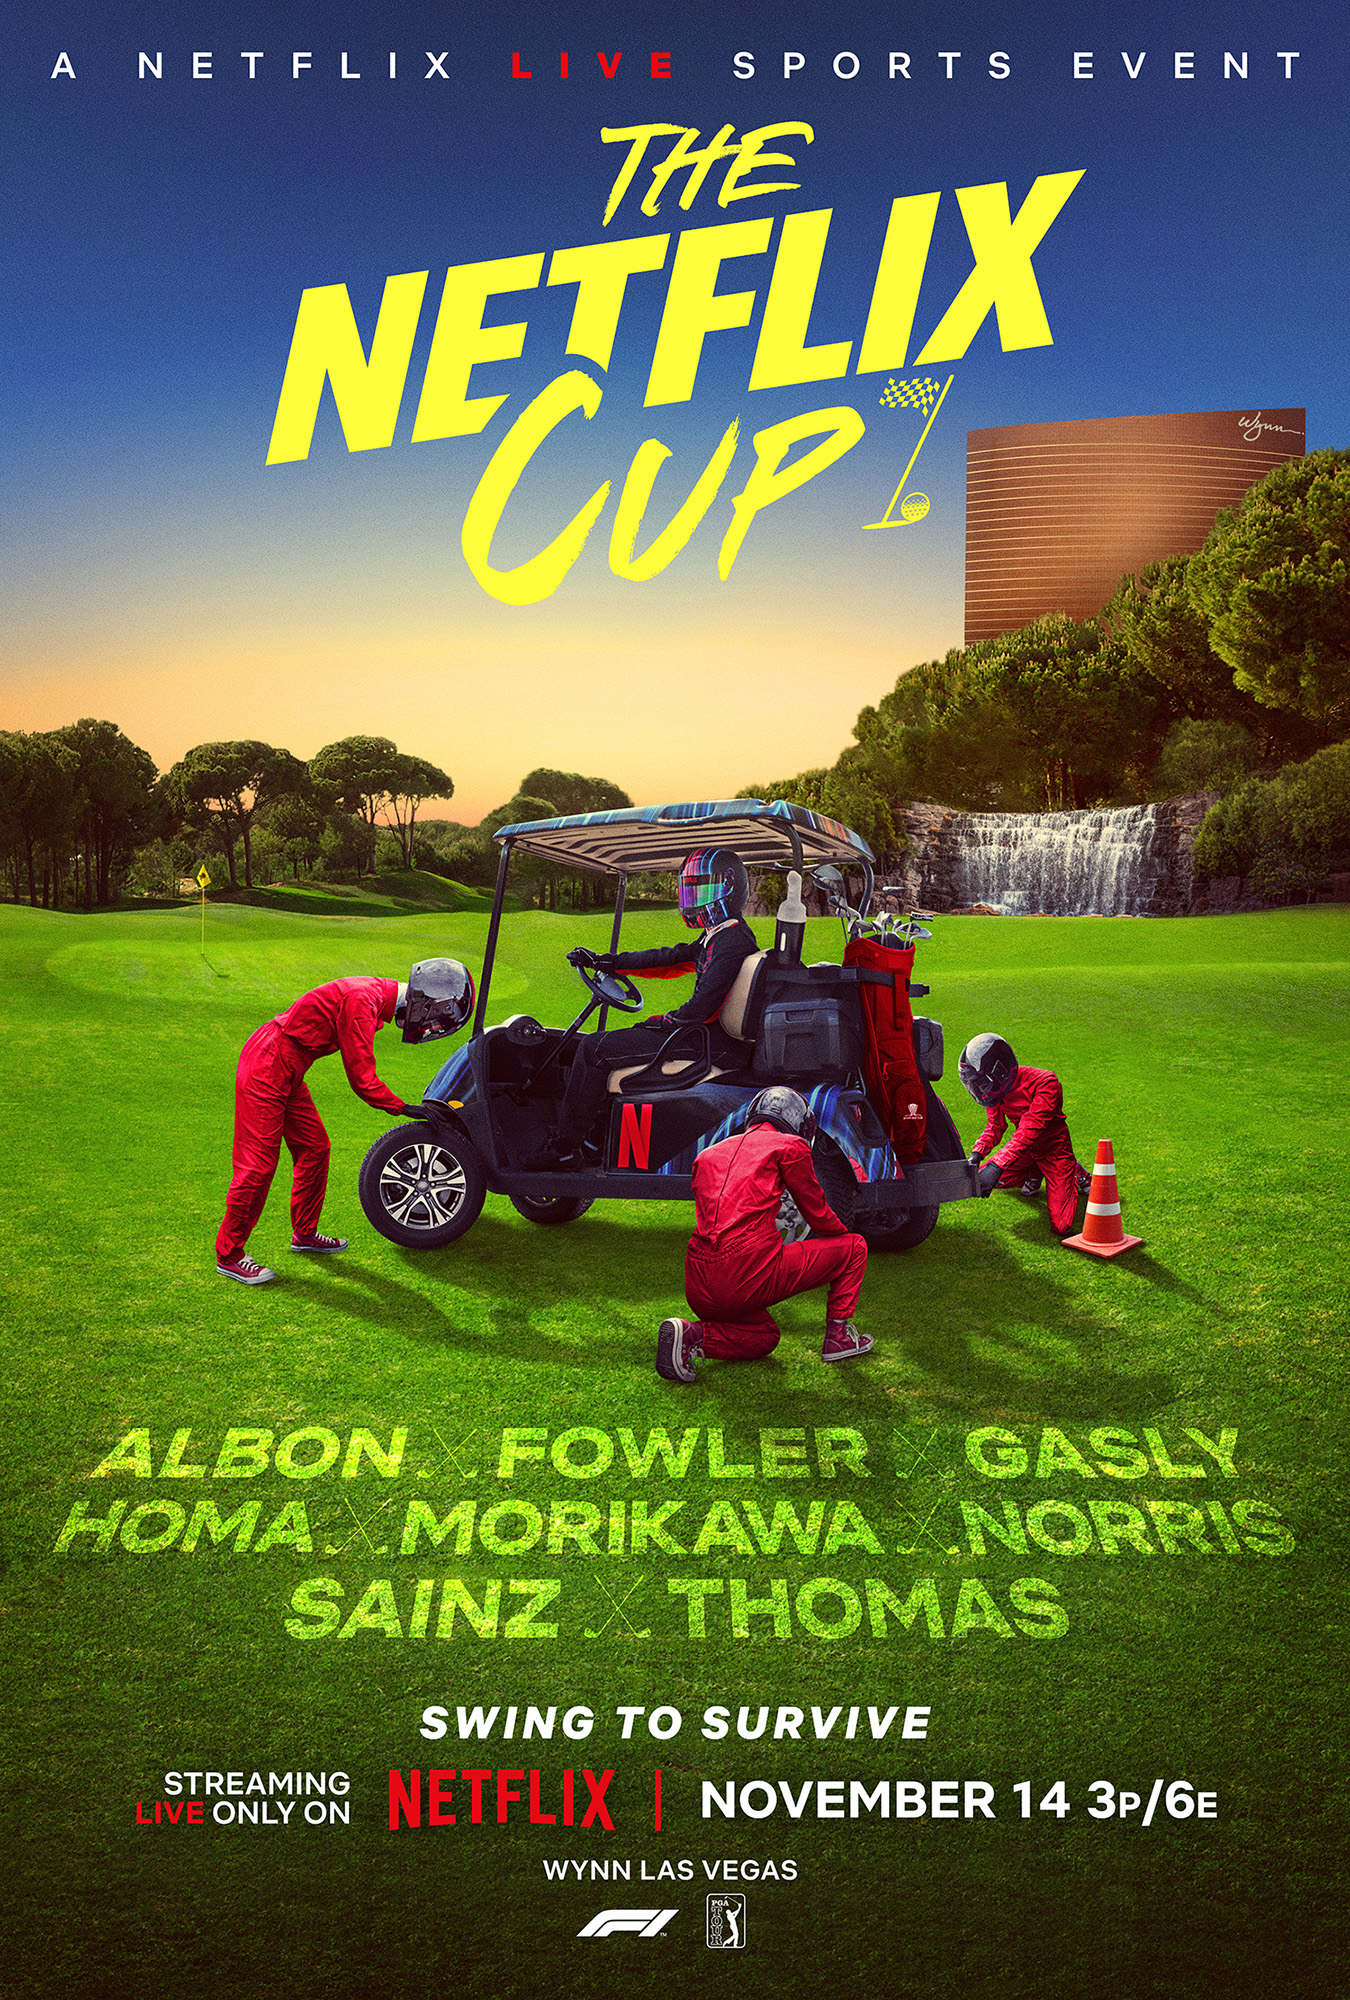 Promo poster for The Netflix Cup.